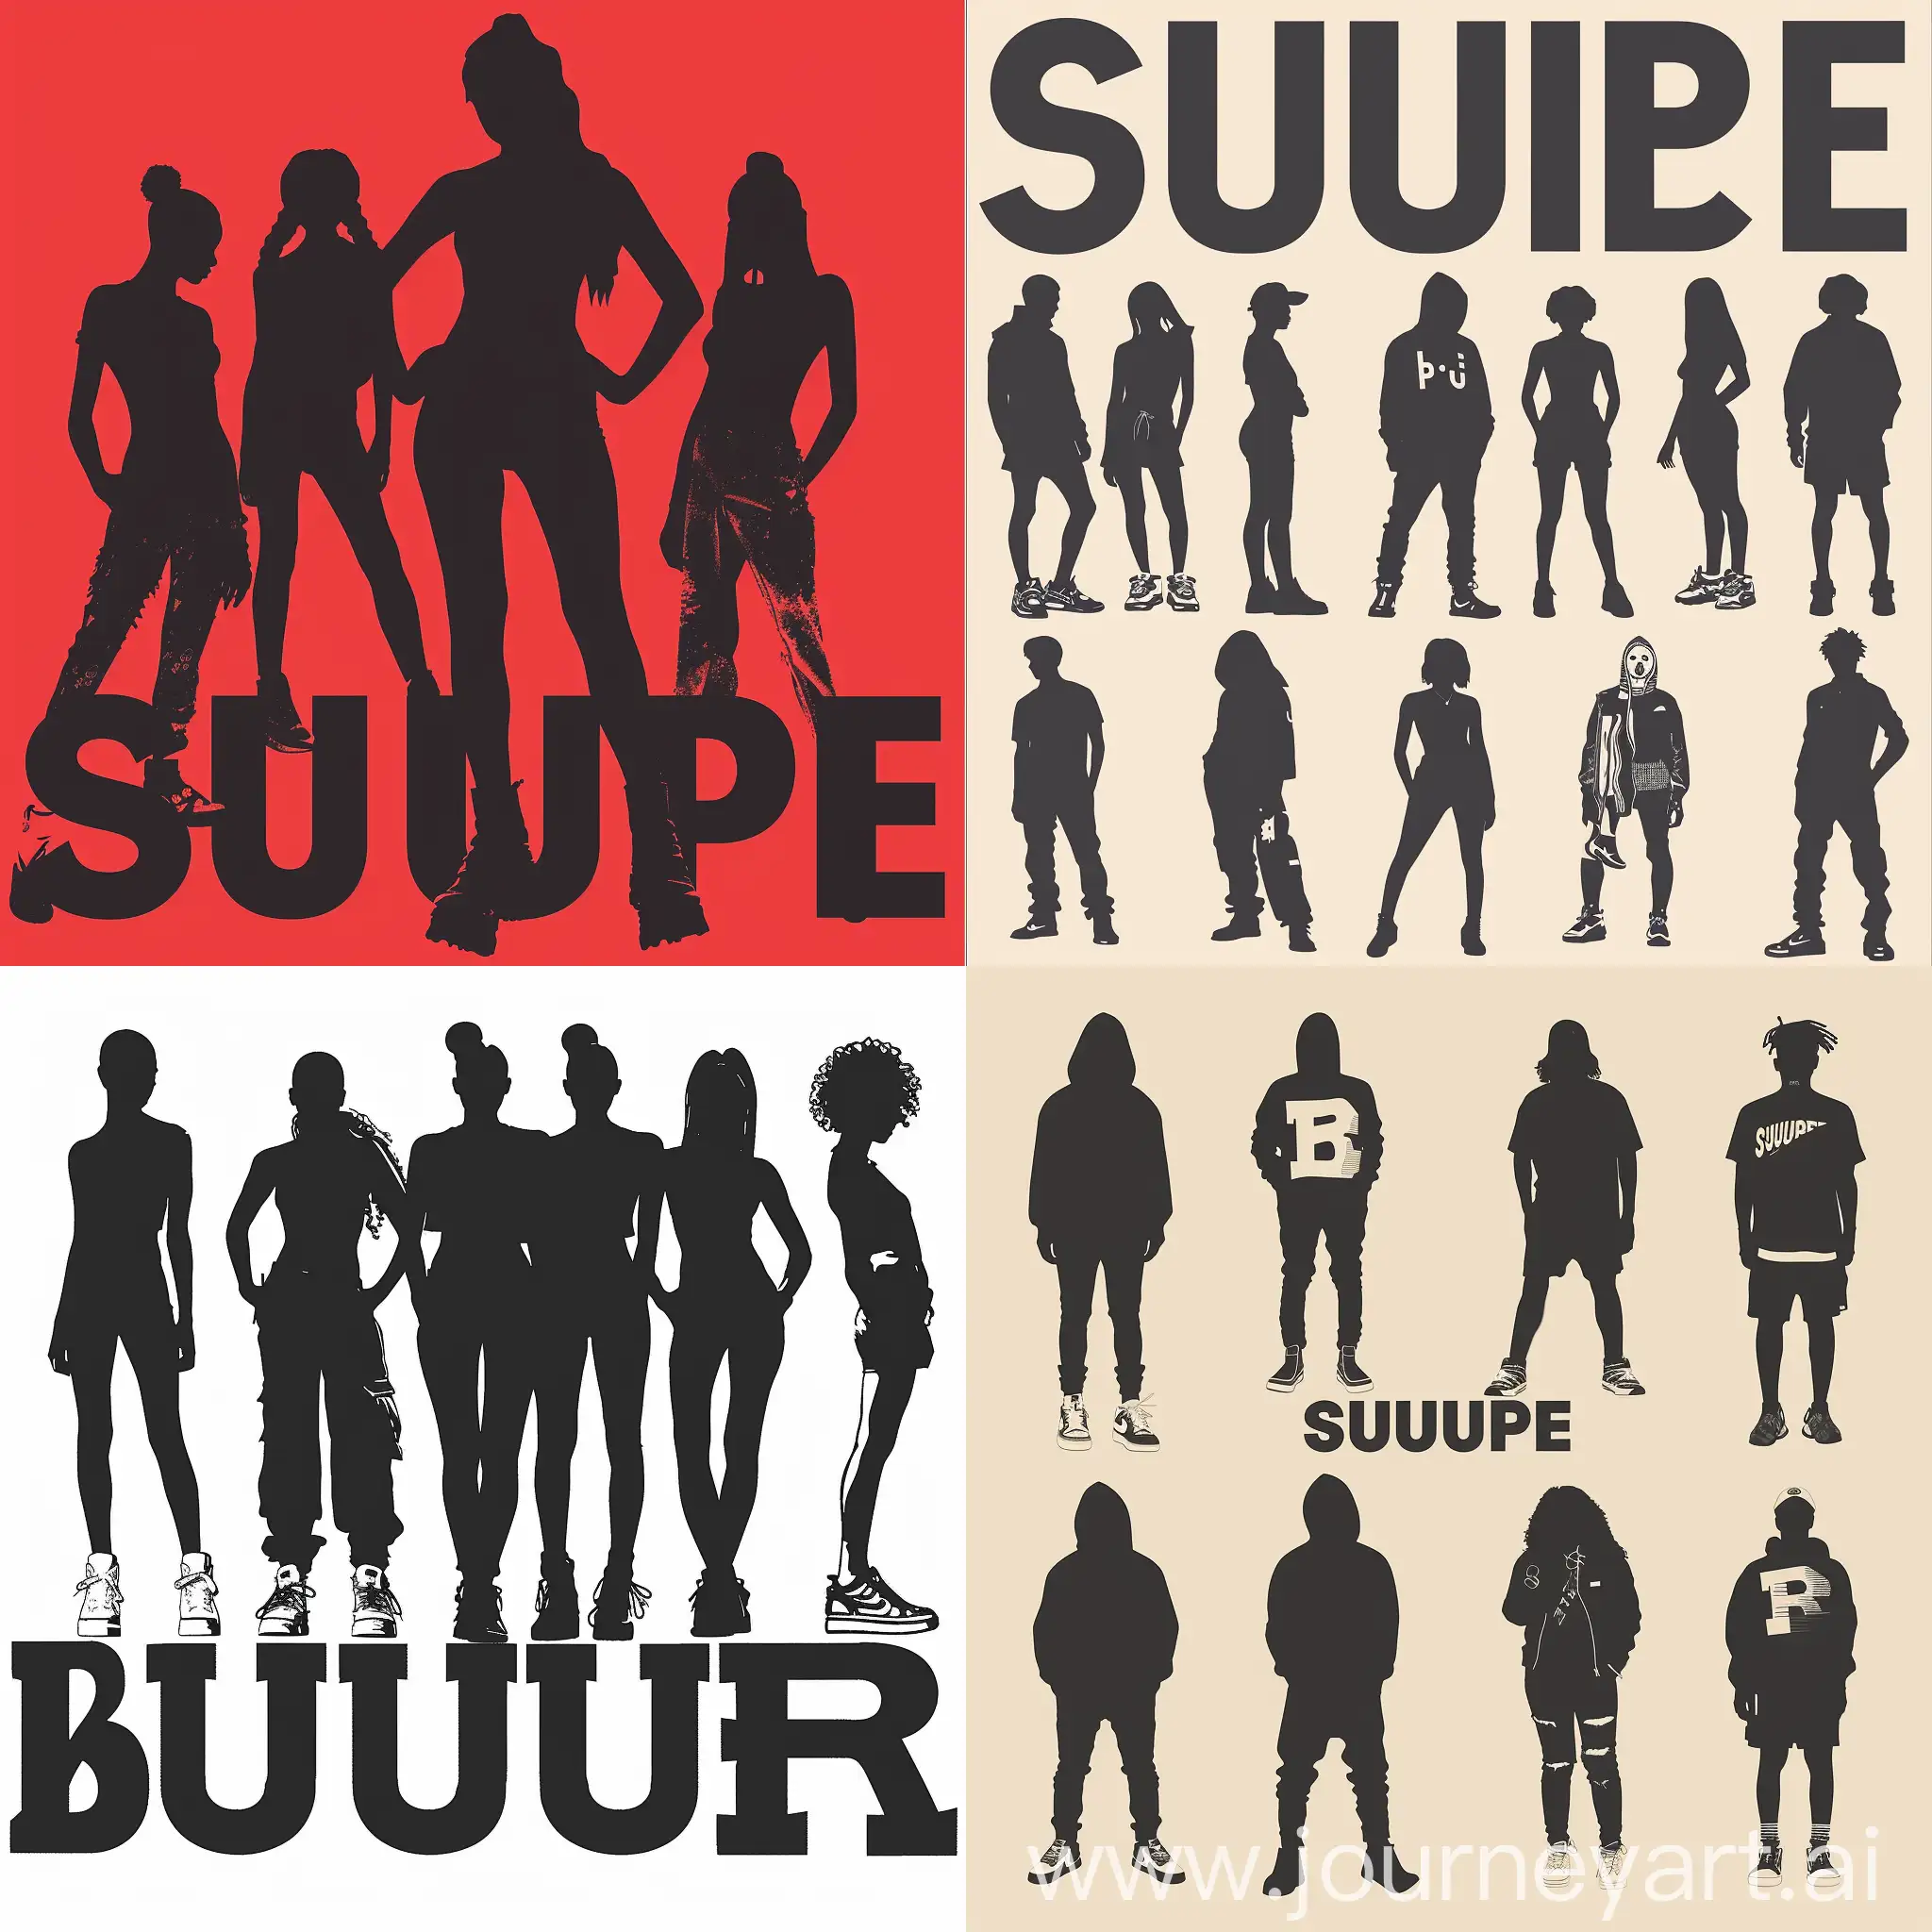 create a silhouette board of streetwear brand supreme with human influencers images